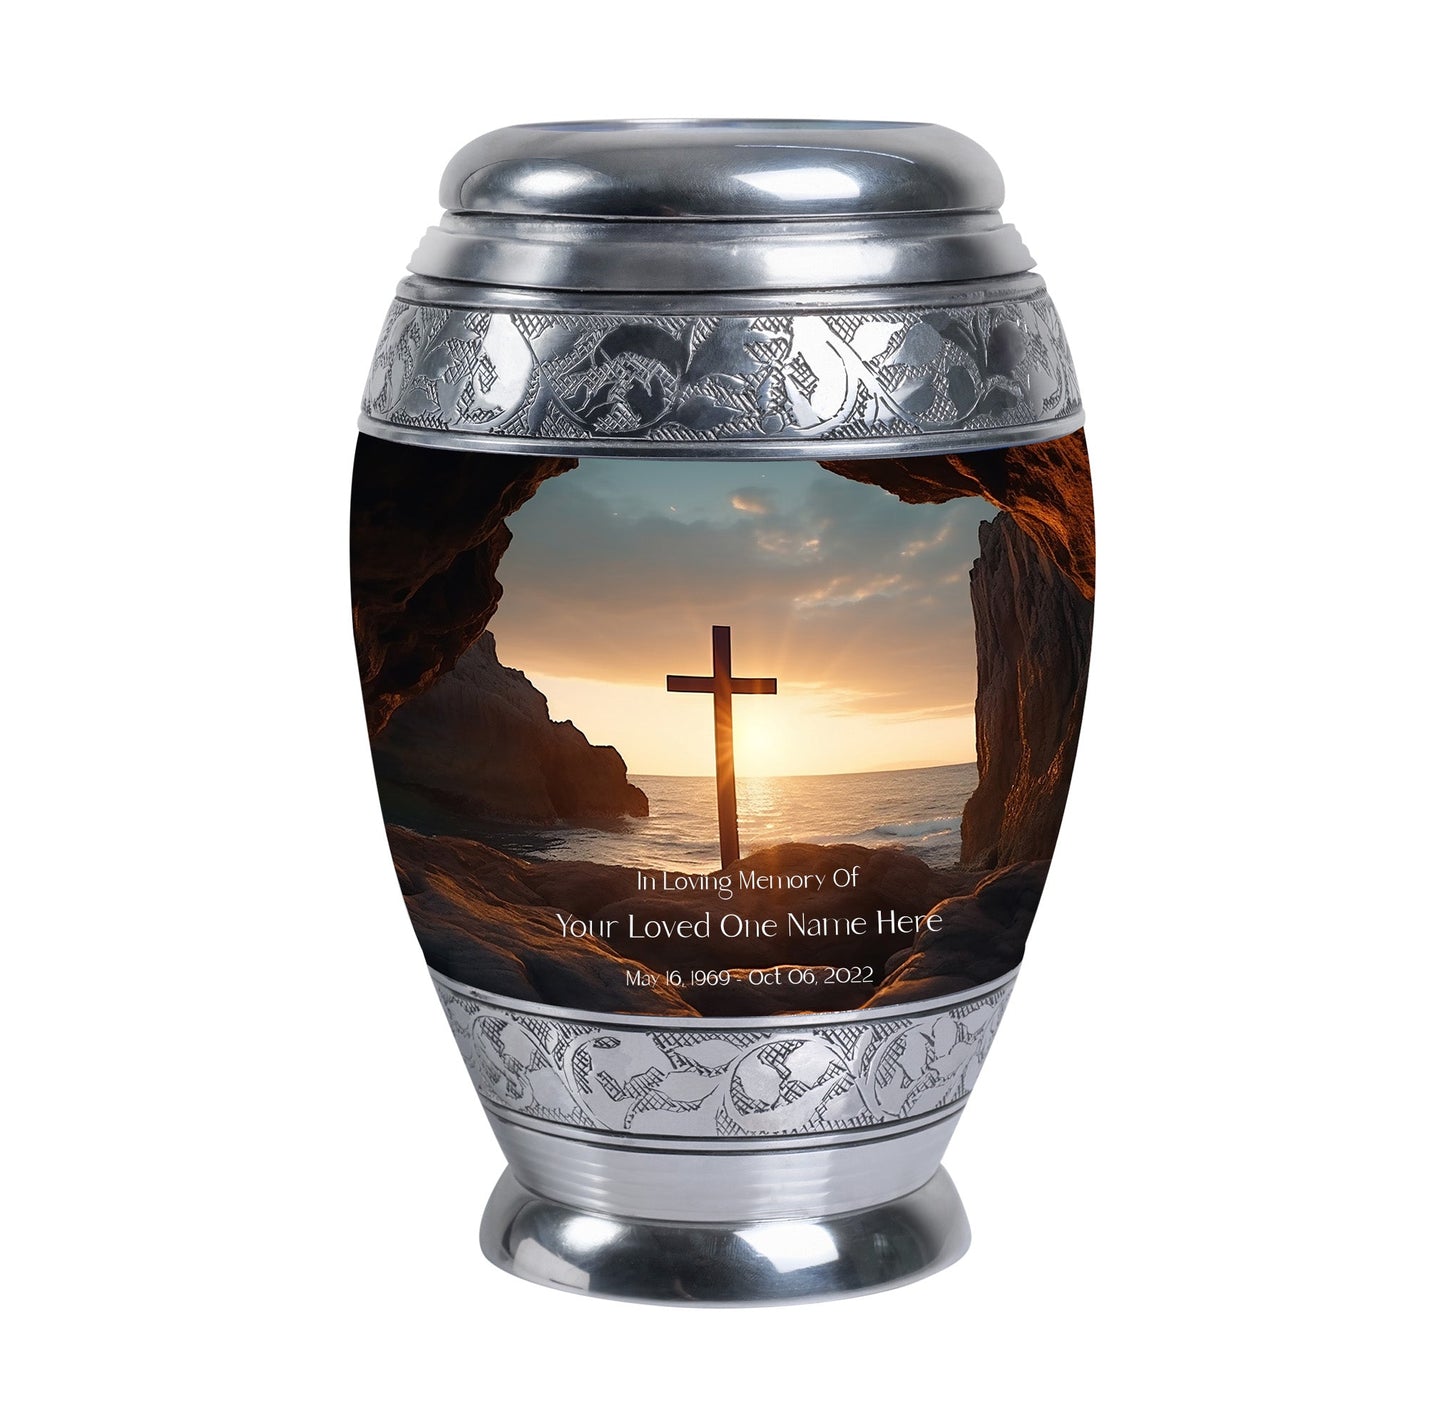 Dignified Remembrance Urns